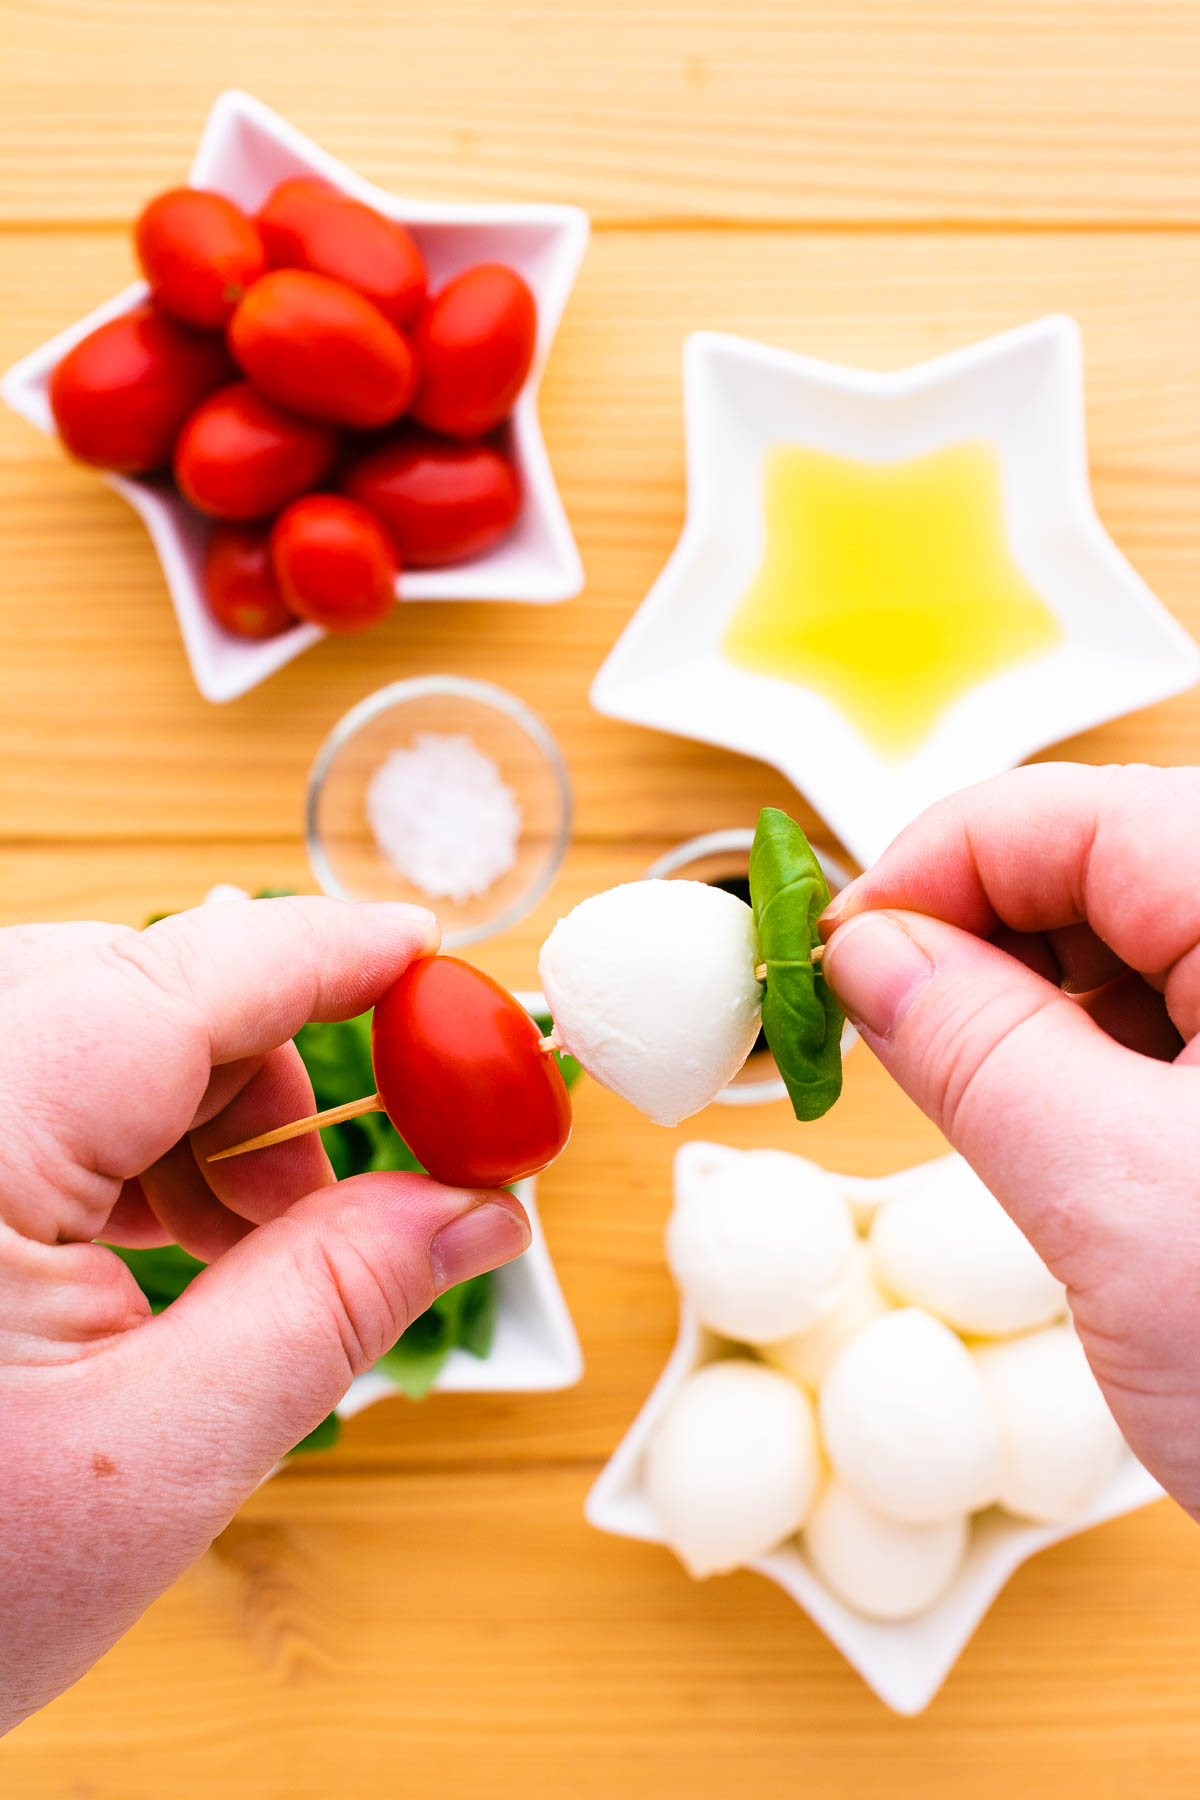 Process photo showing how to thread caprese salad ingredients onto a wooden skewer.